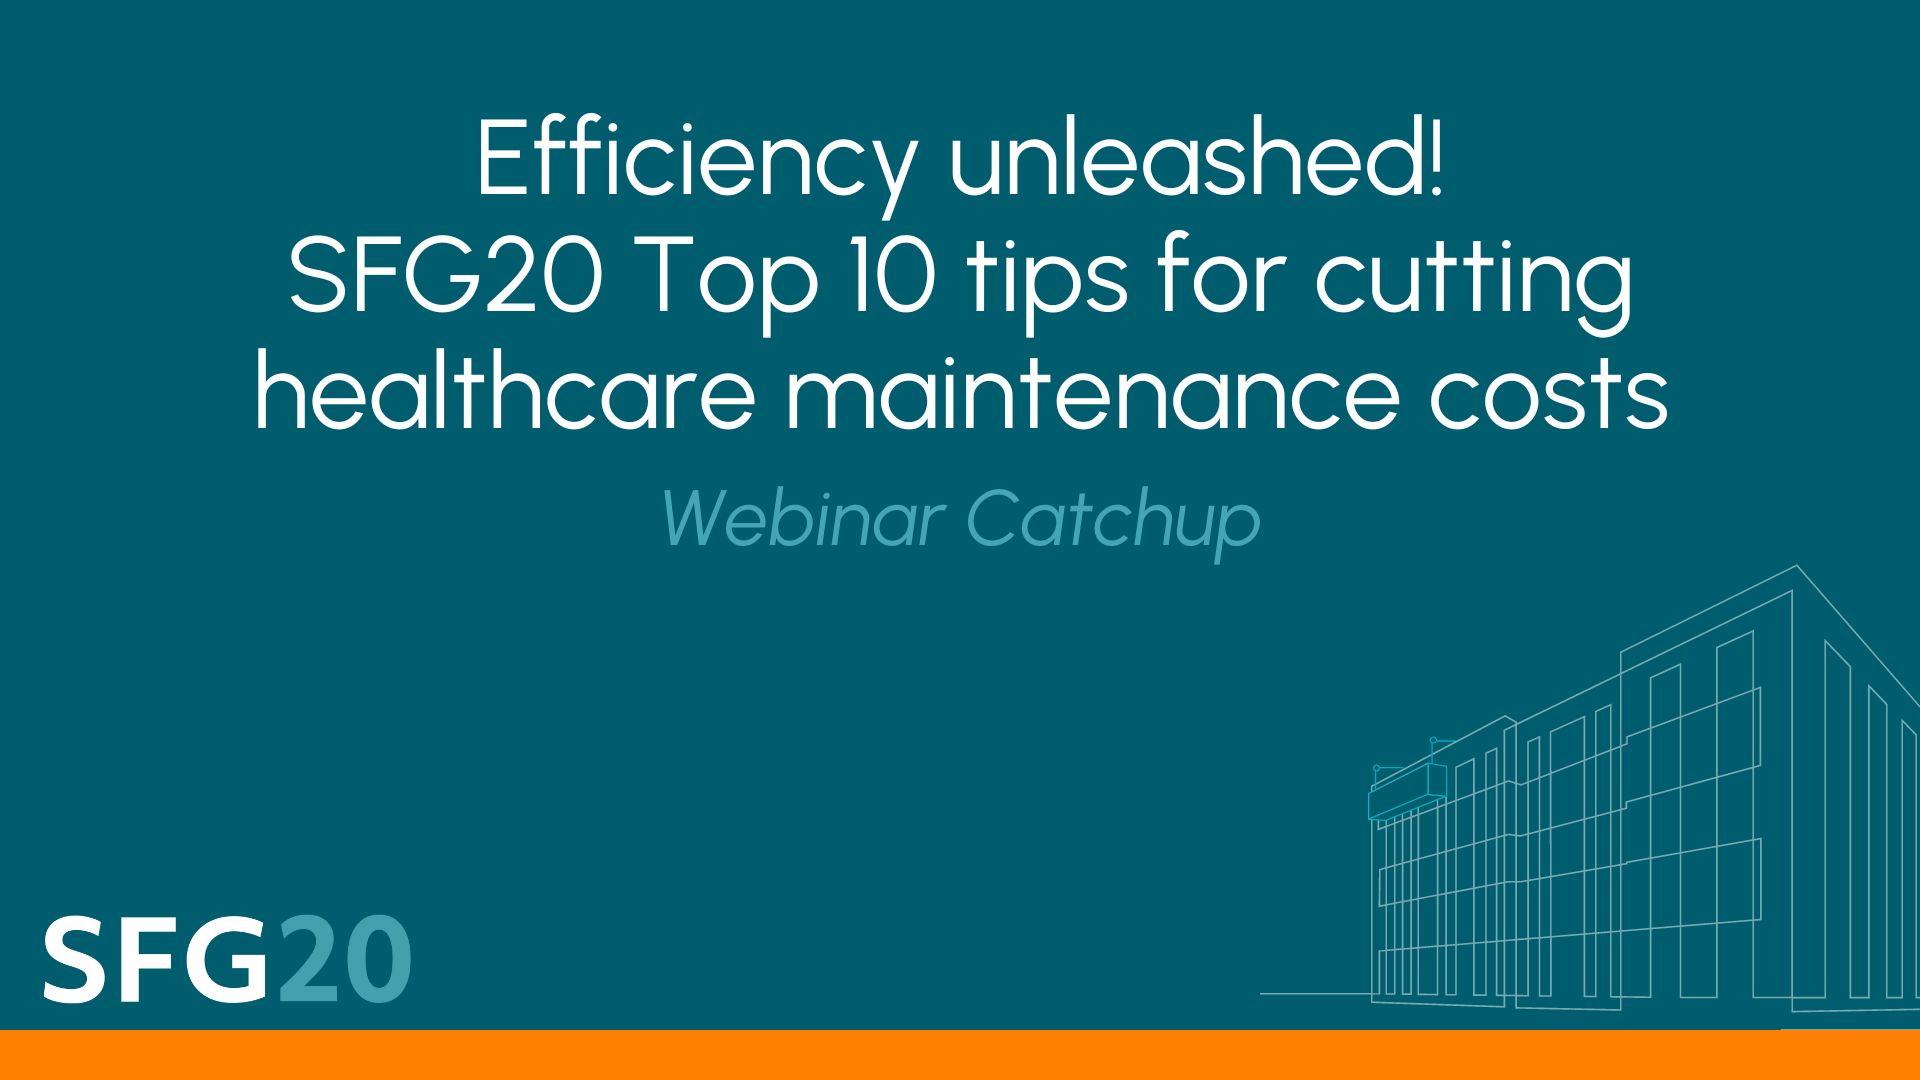 Efficiency unleashed! SFG20 Top 10 tips for cutting healthcare maintenance costs